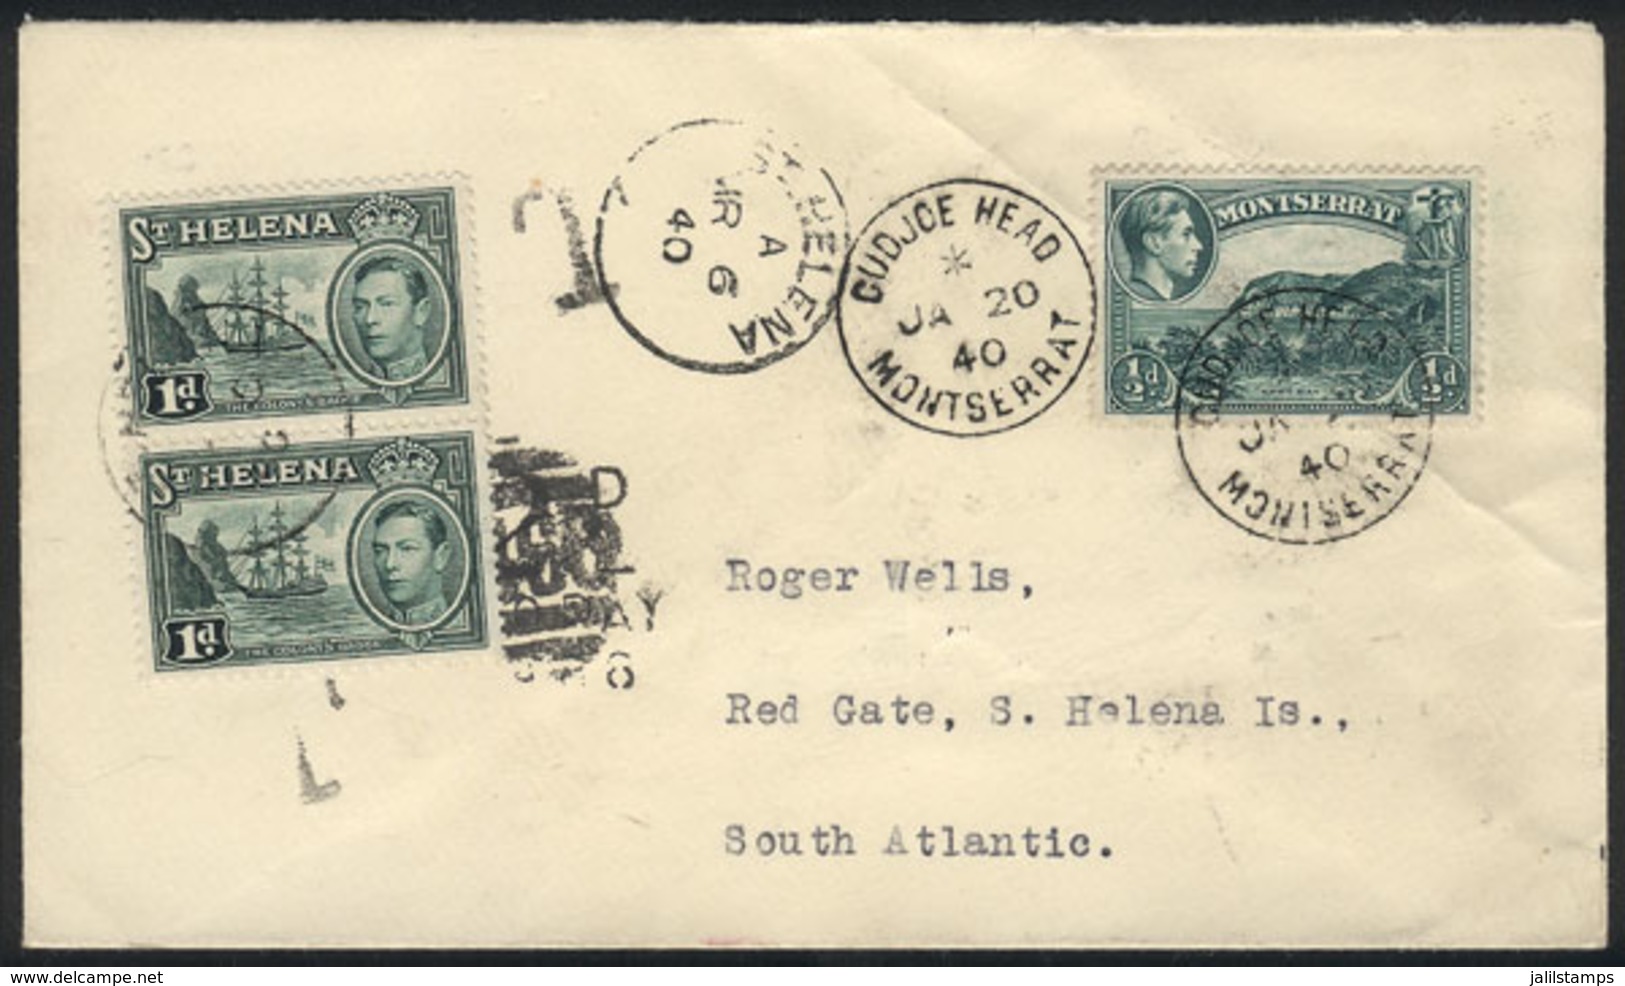 SAINT HELENA: Stamps Used As POSTAGE DUE STAMPS: Cover Sent From Gudjoe Head (Montserrat) To Red Gate, Saint Helena, On  - St. Helena